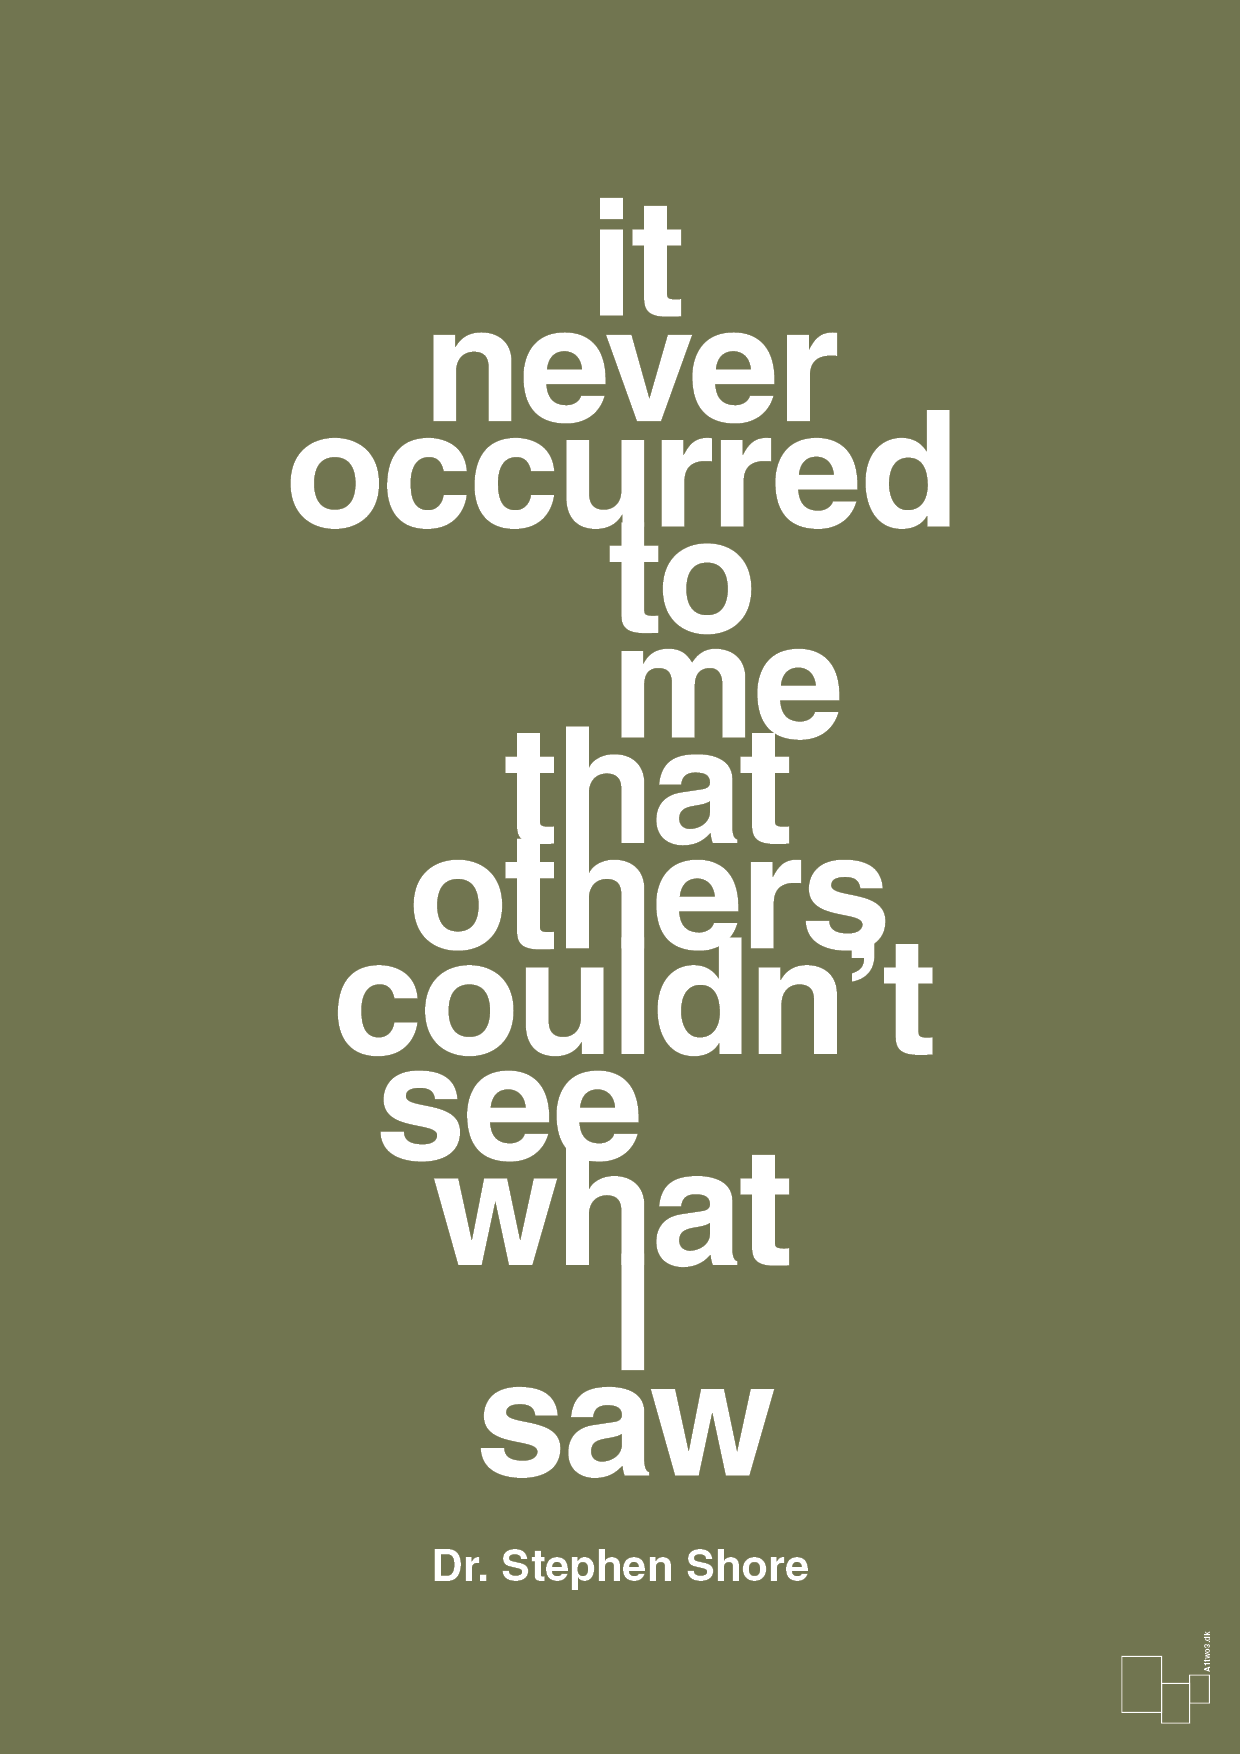 it never occurred to me that others couldn’t see what I saw - Plakat med Samfund i Secret Meadow